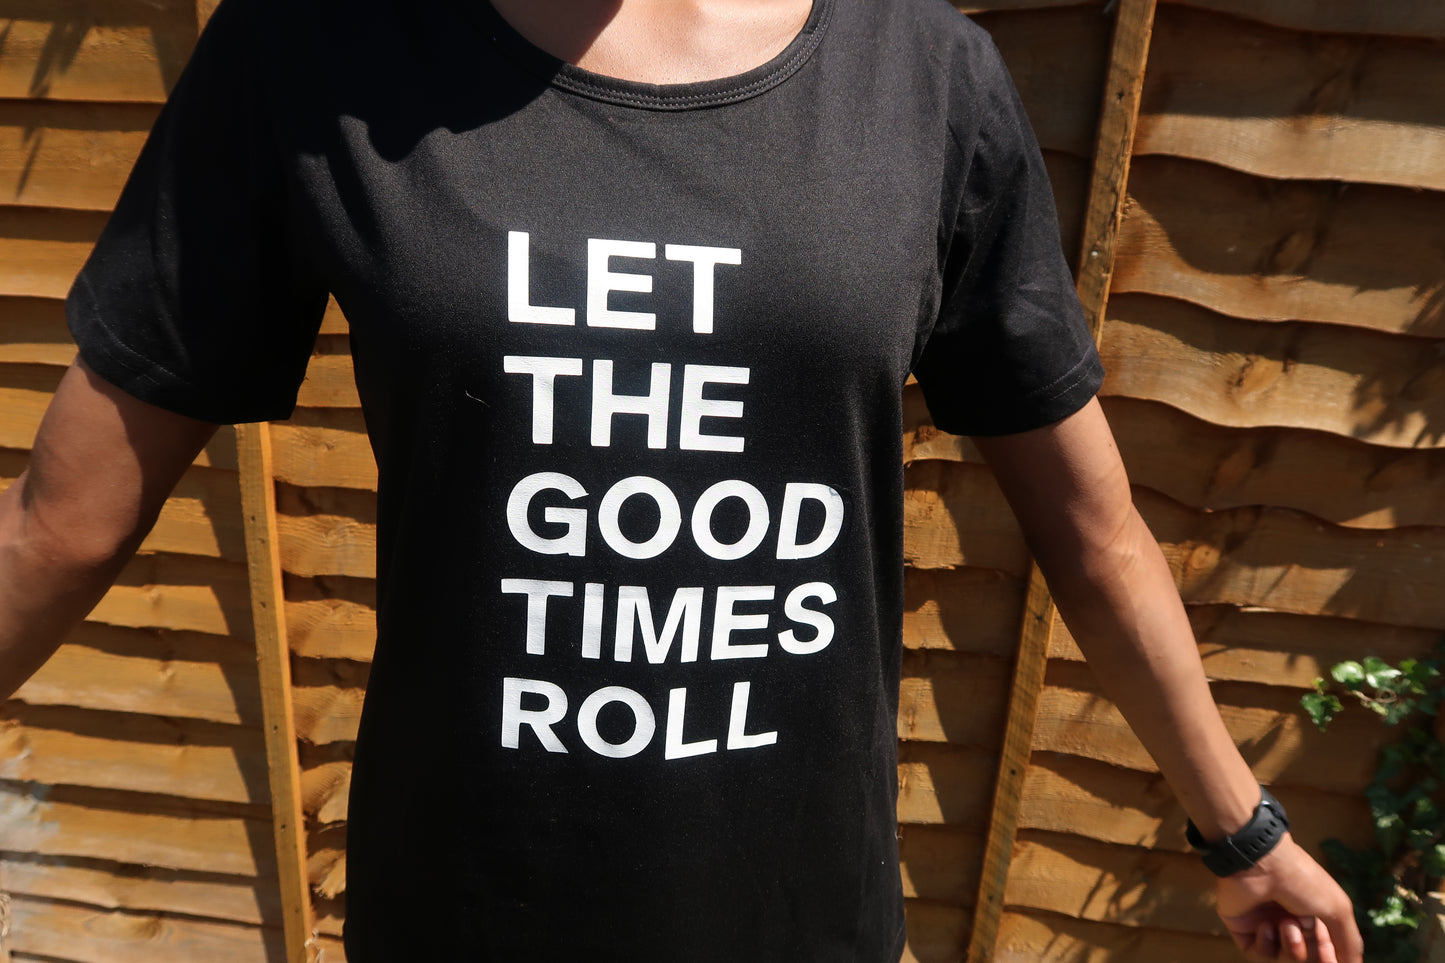 Let the good times roll - Black t-shirt